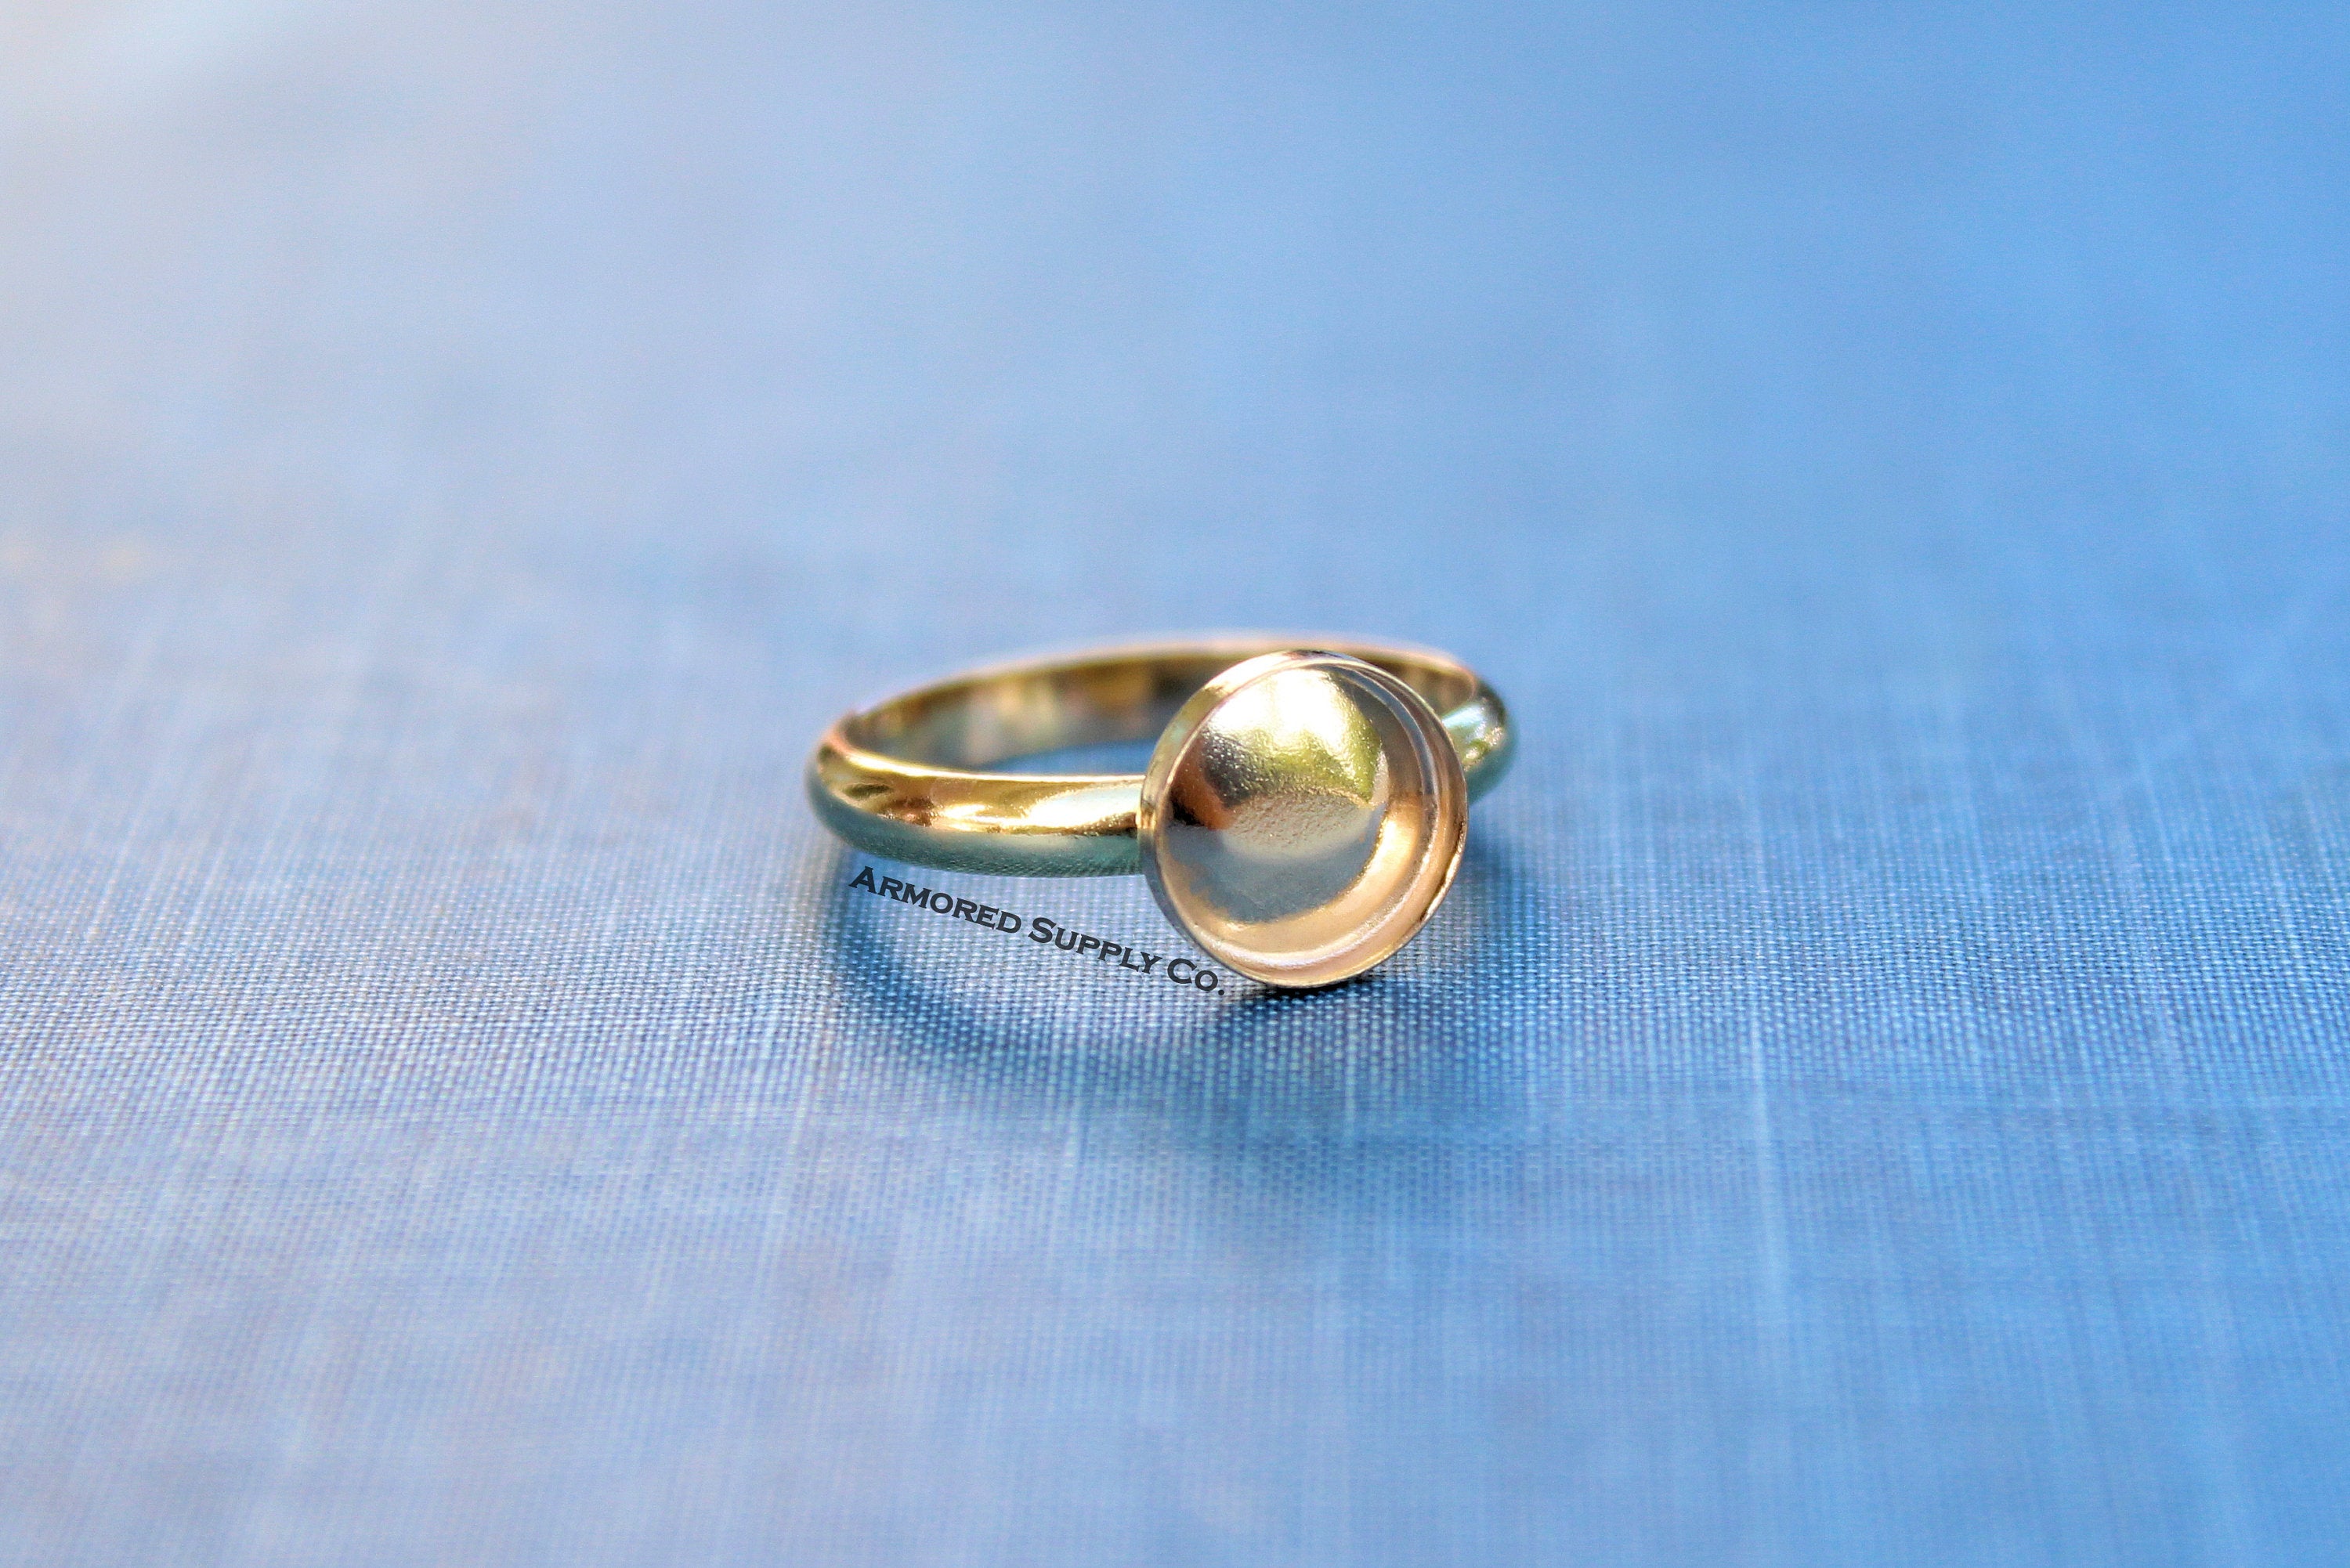 Gold Filled 12mm Bezel Cup Ring blank, Half Round Ring Band, Breast Milk DIY ring, DIY jewelry supplies, wholesale jewelry, diy ring blank